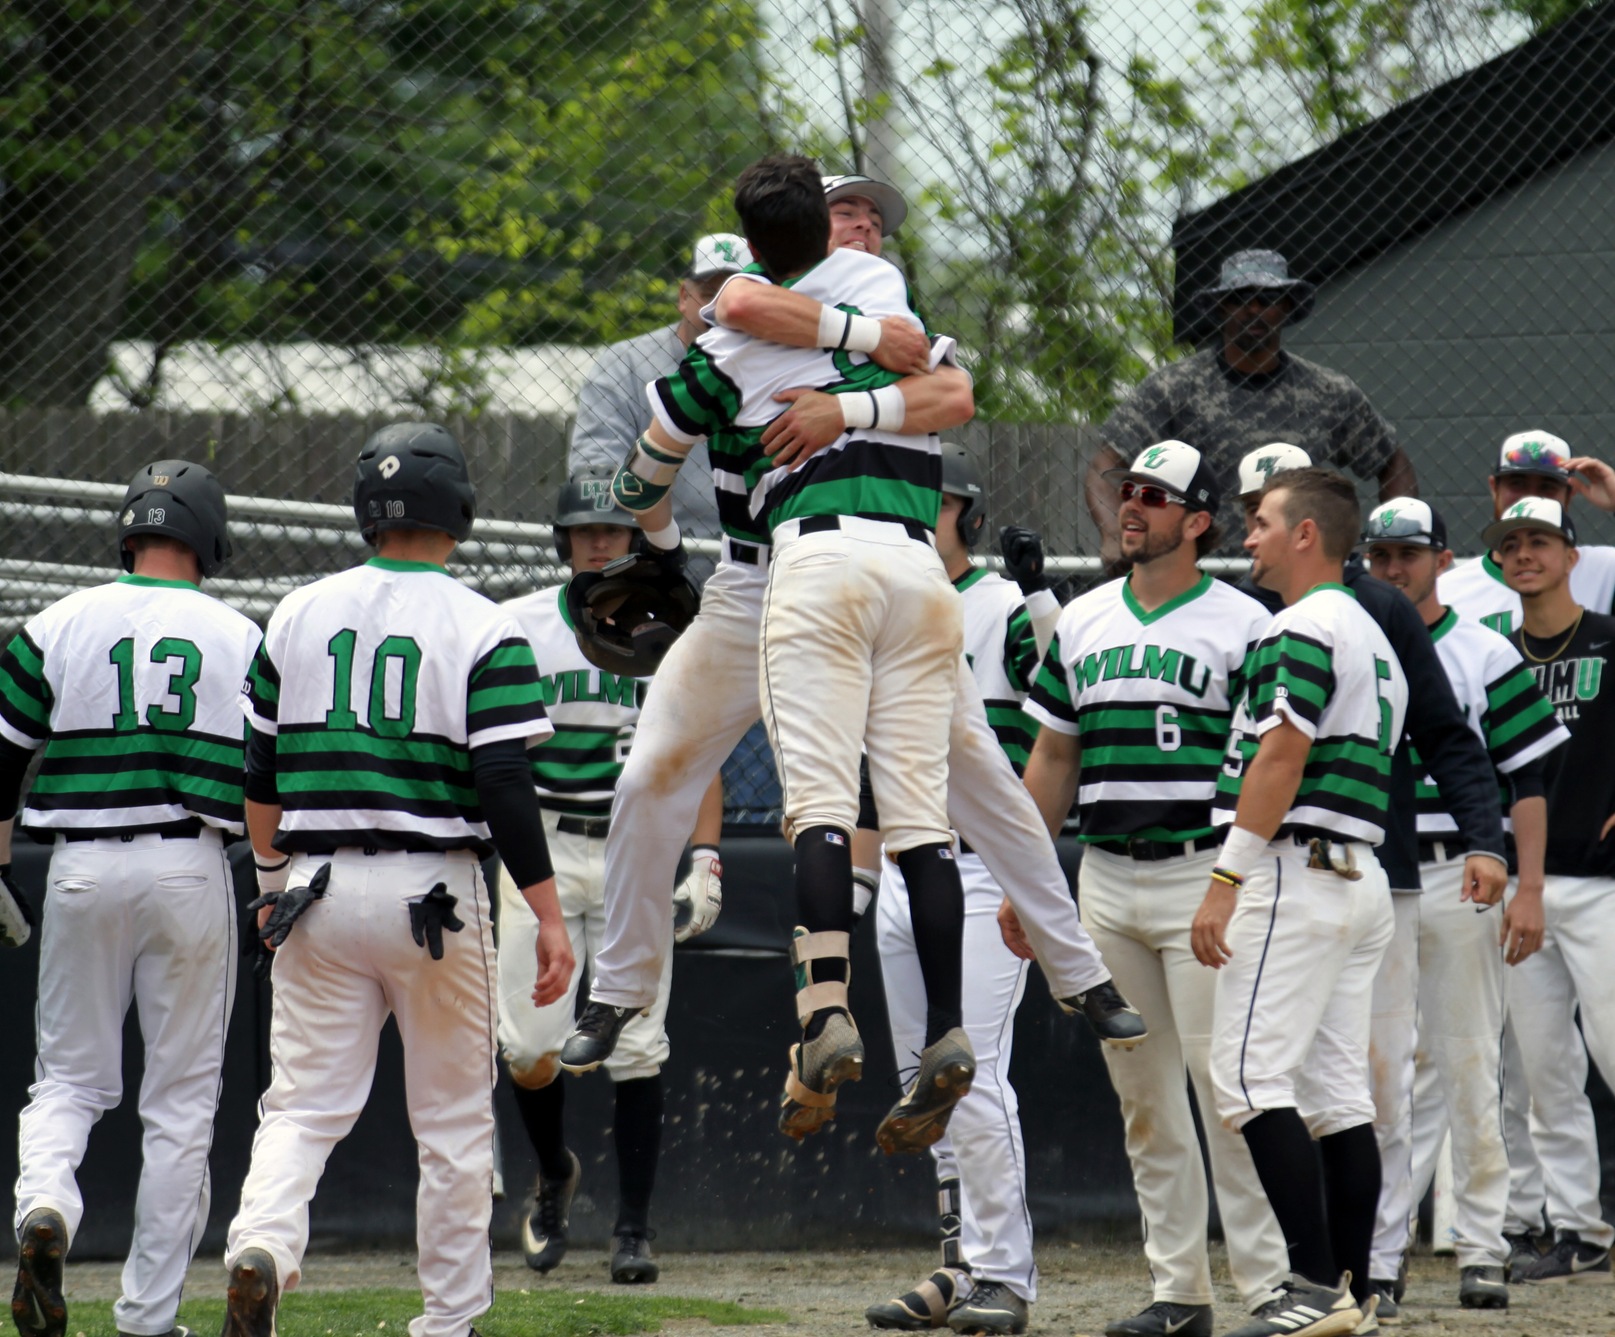 South’s No. 2 Wildcats Smash 19 Hits on Way to 14-3 Win over Nyack in CACC Tournament Play-In